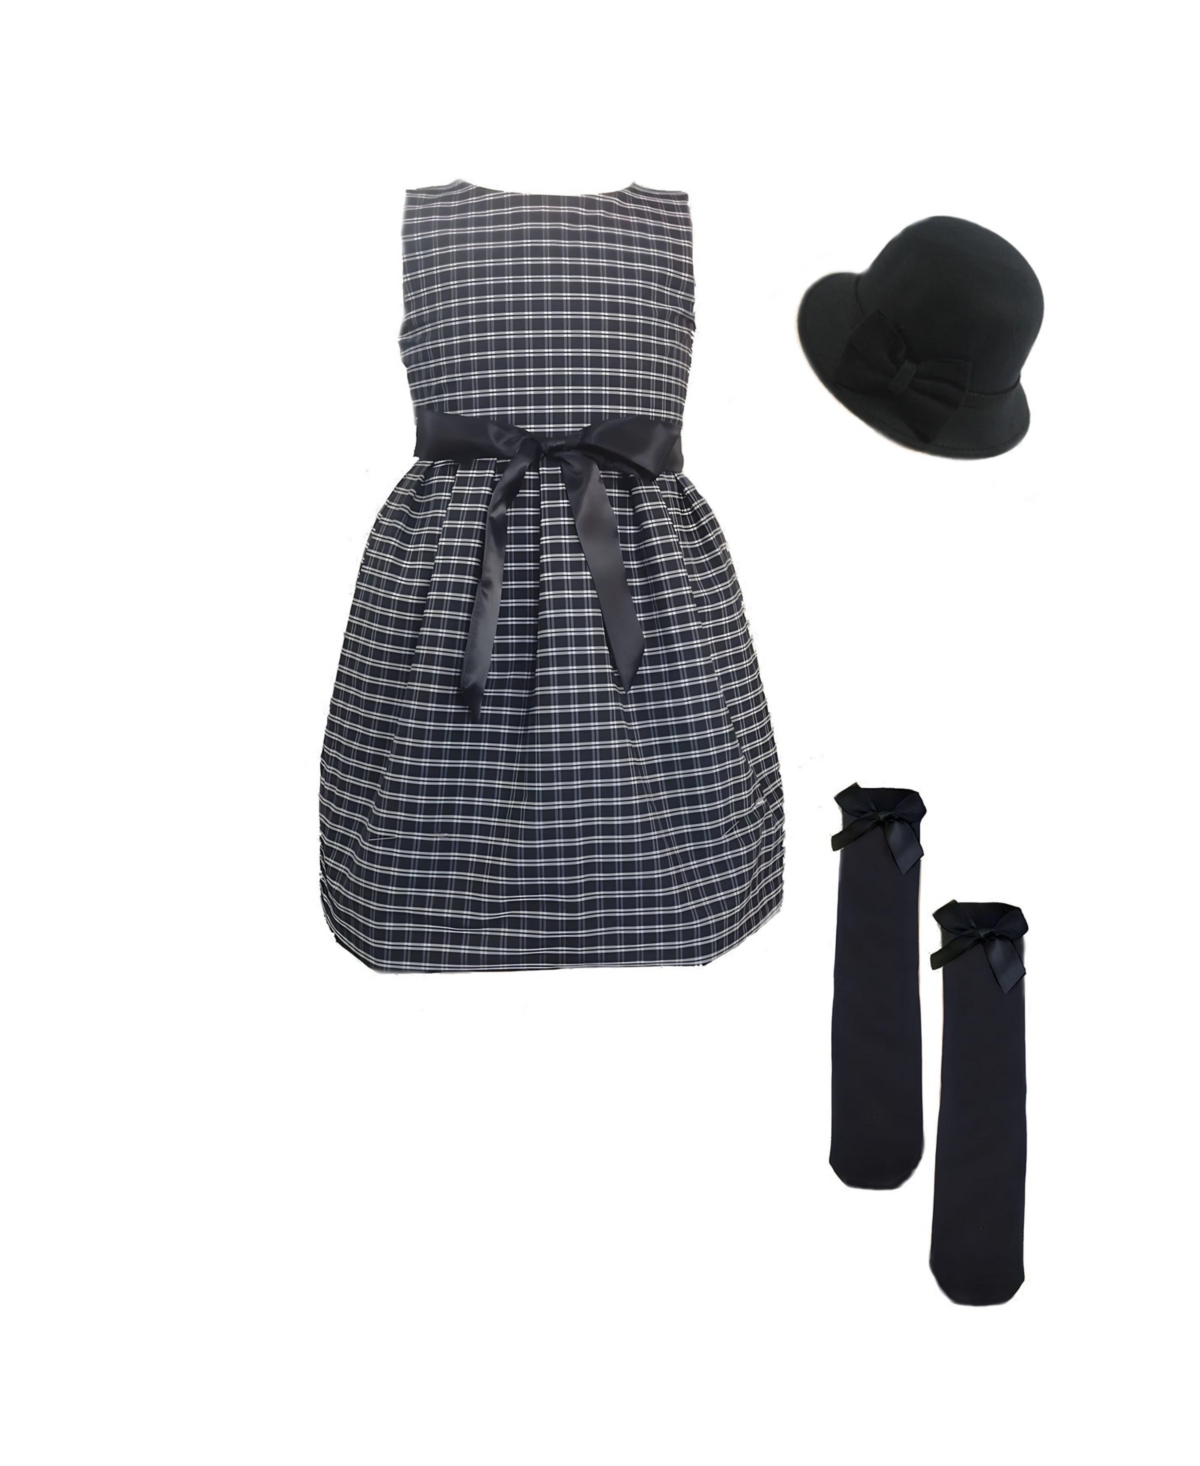 Mi Amore Gigi Toddler, Child Girls Plaid Dress And Sock Set With Hat In Black And White